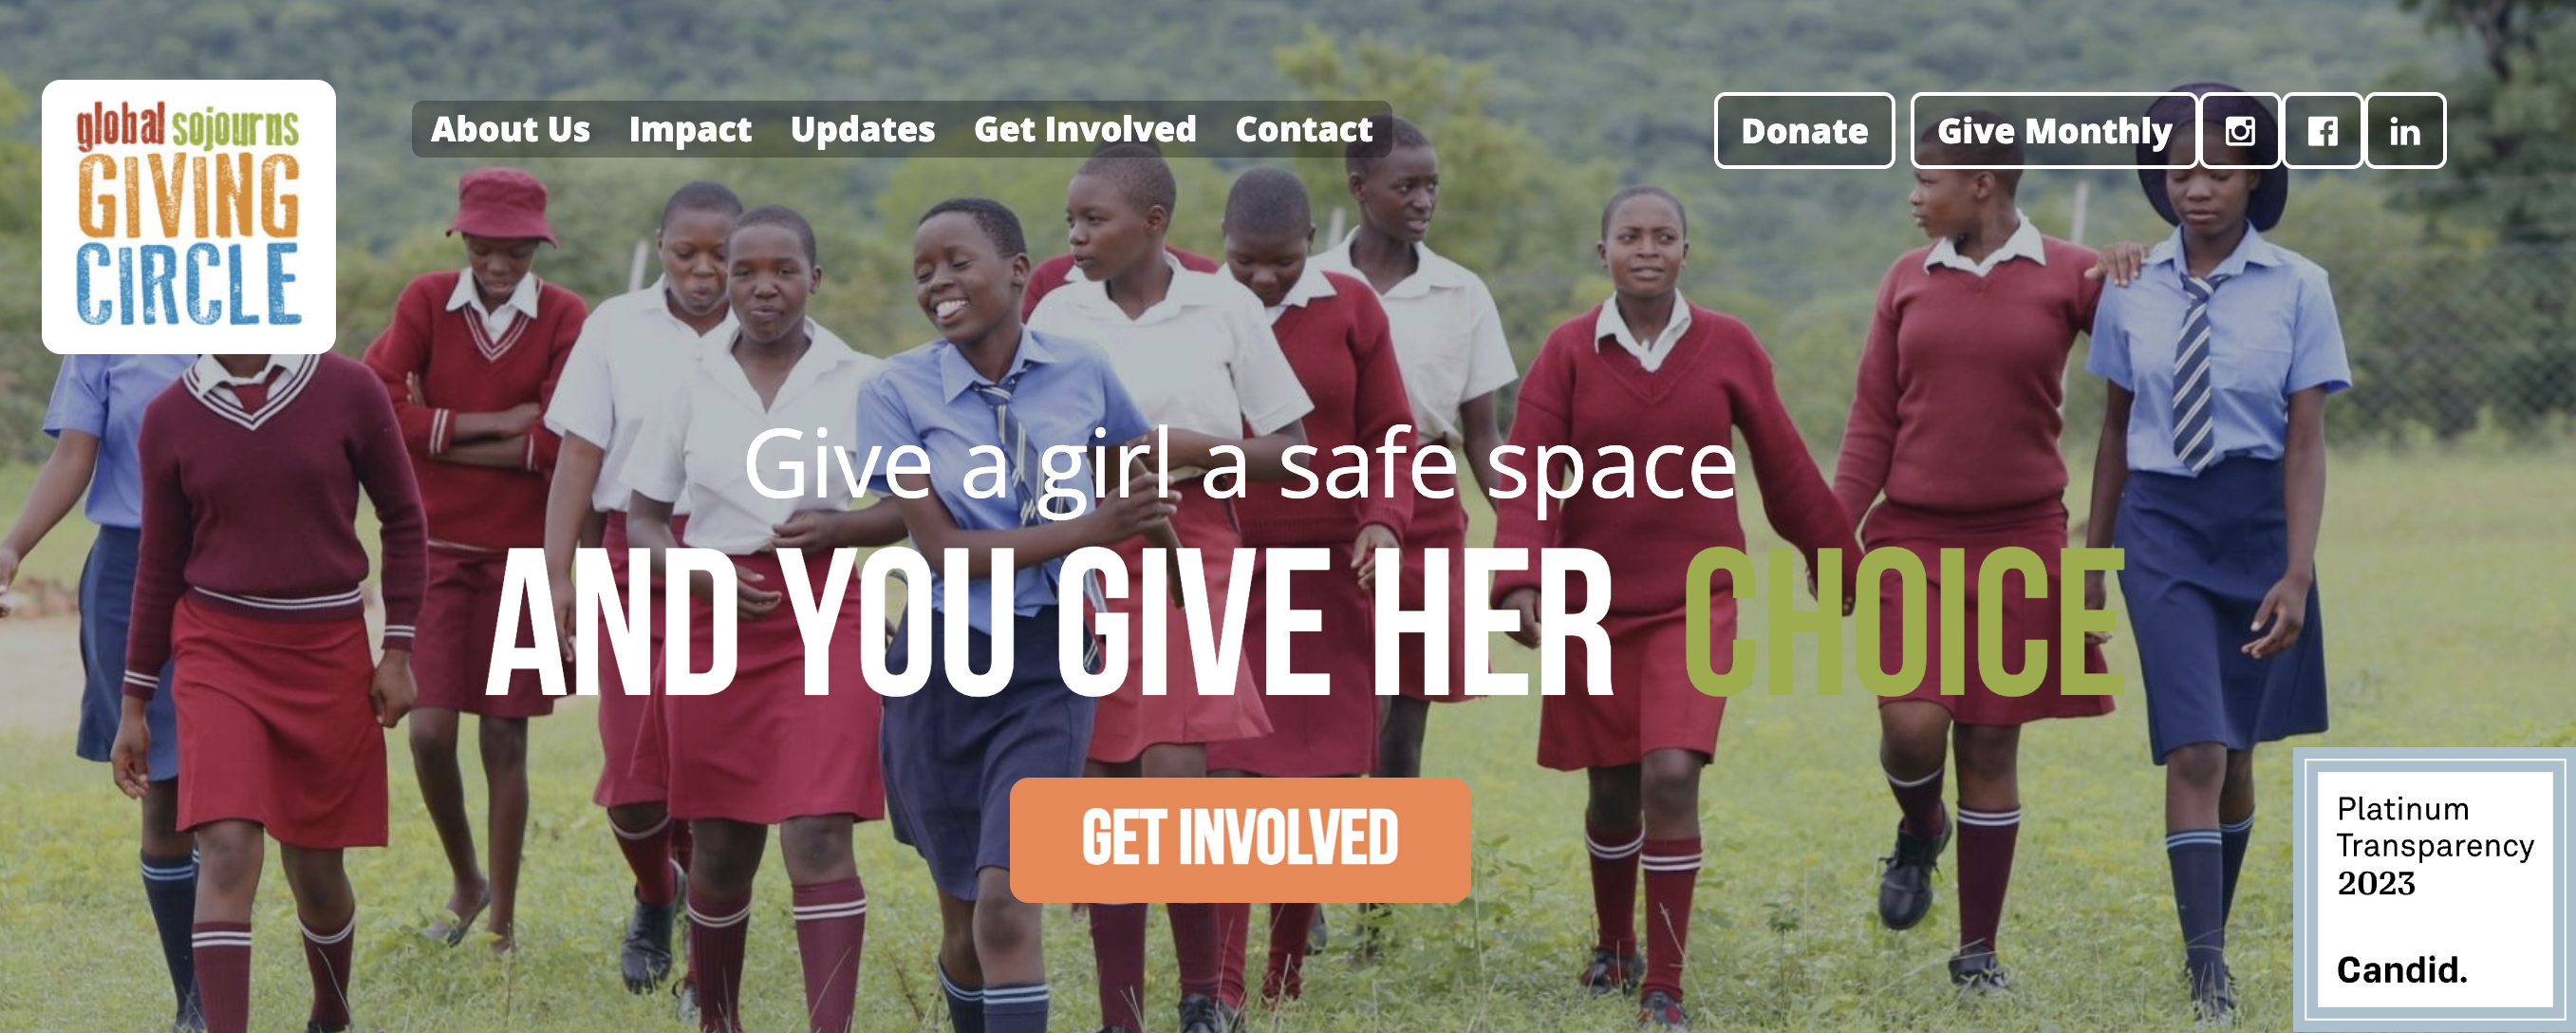 Screenshot of the homepage for Global Sojourns Giving Circle